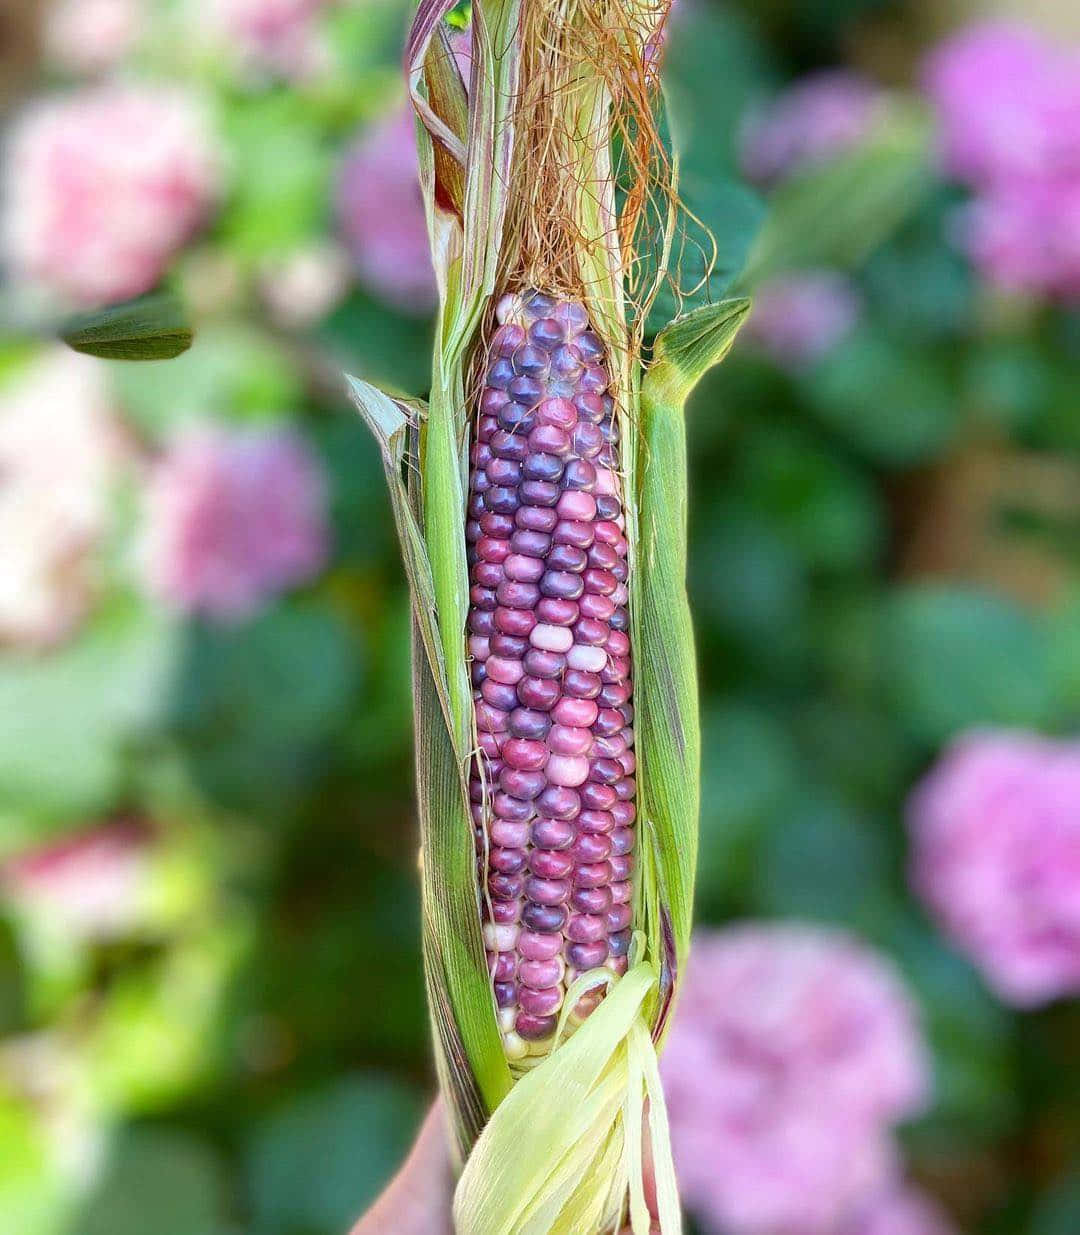 Get 'Kernel from Nature with Purple Corn Wallpaper